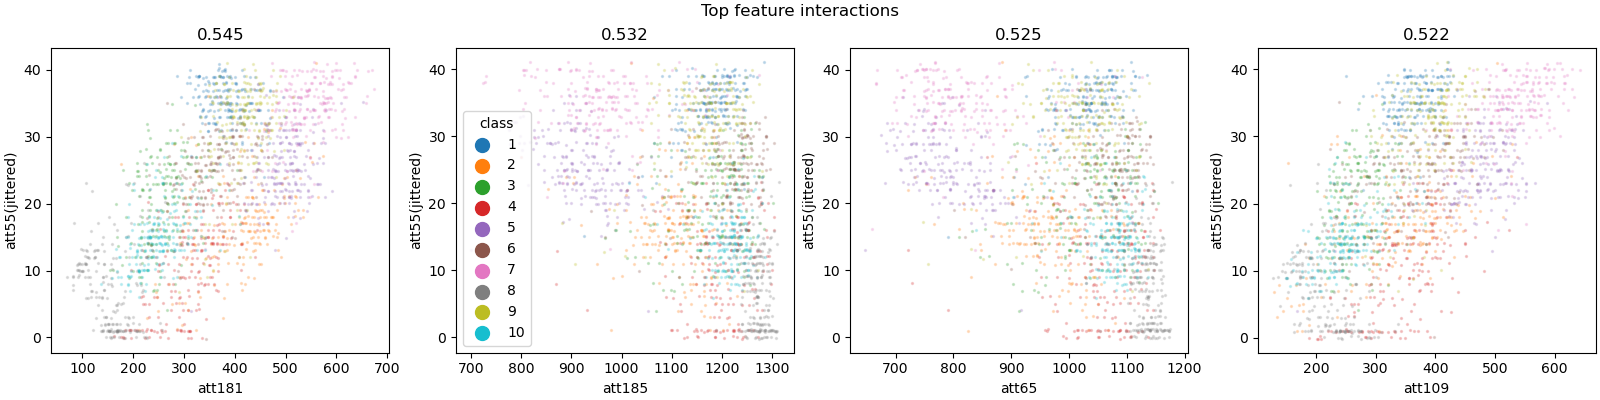 Top feature interactions, 0.545, 0.532, 0.525, 0.522